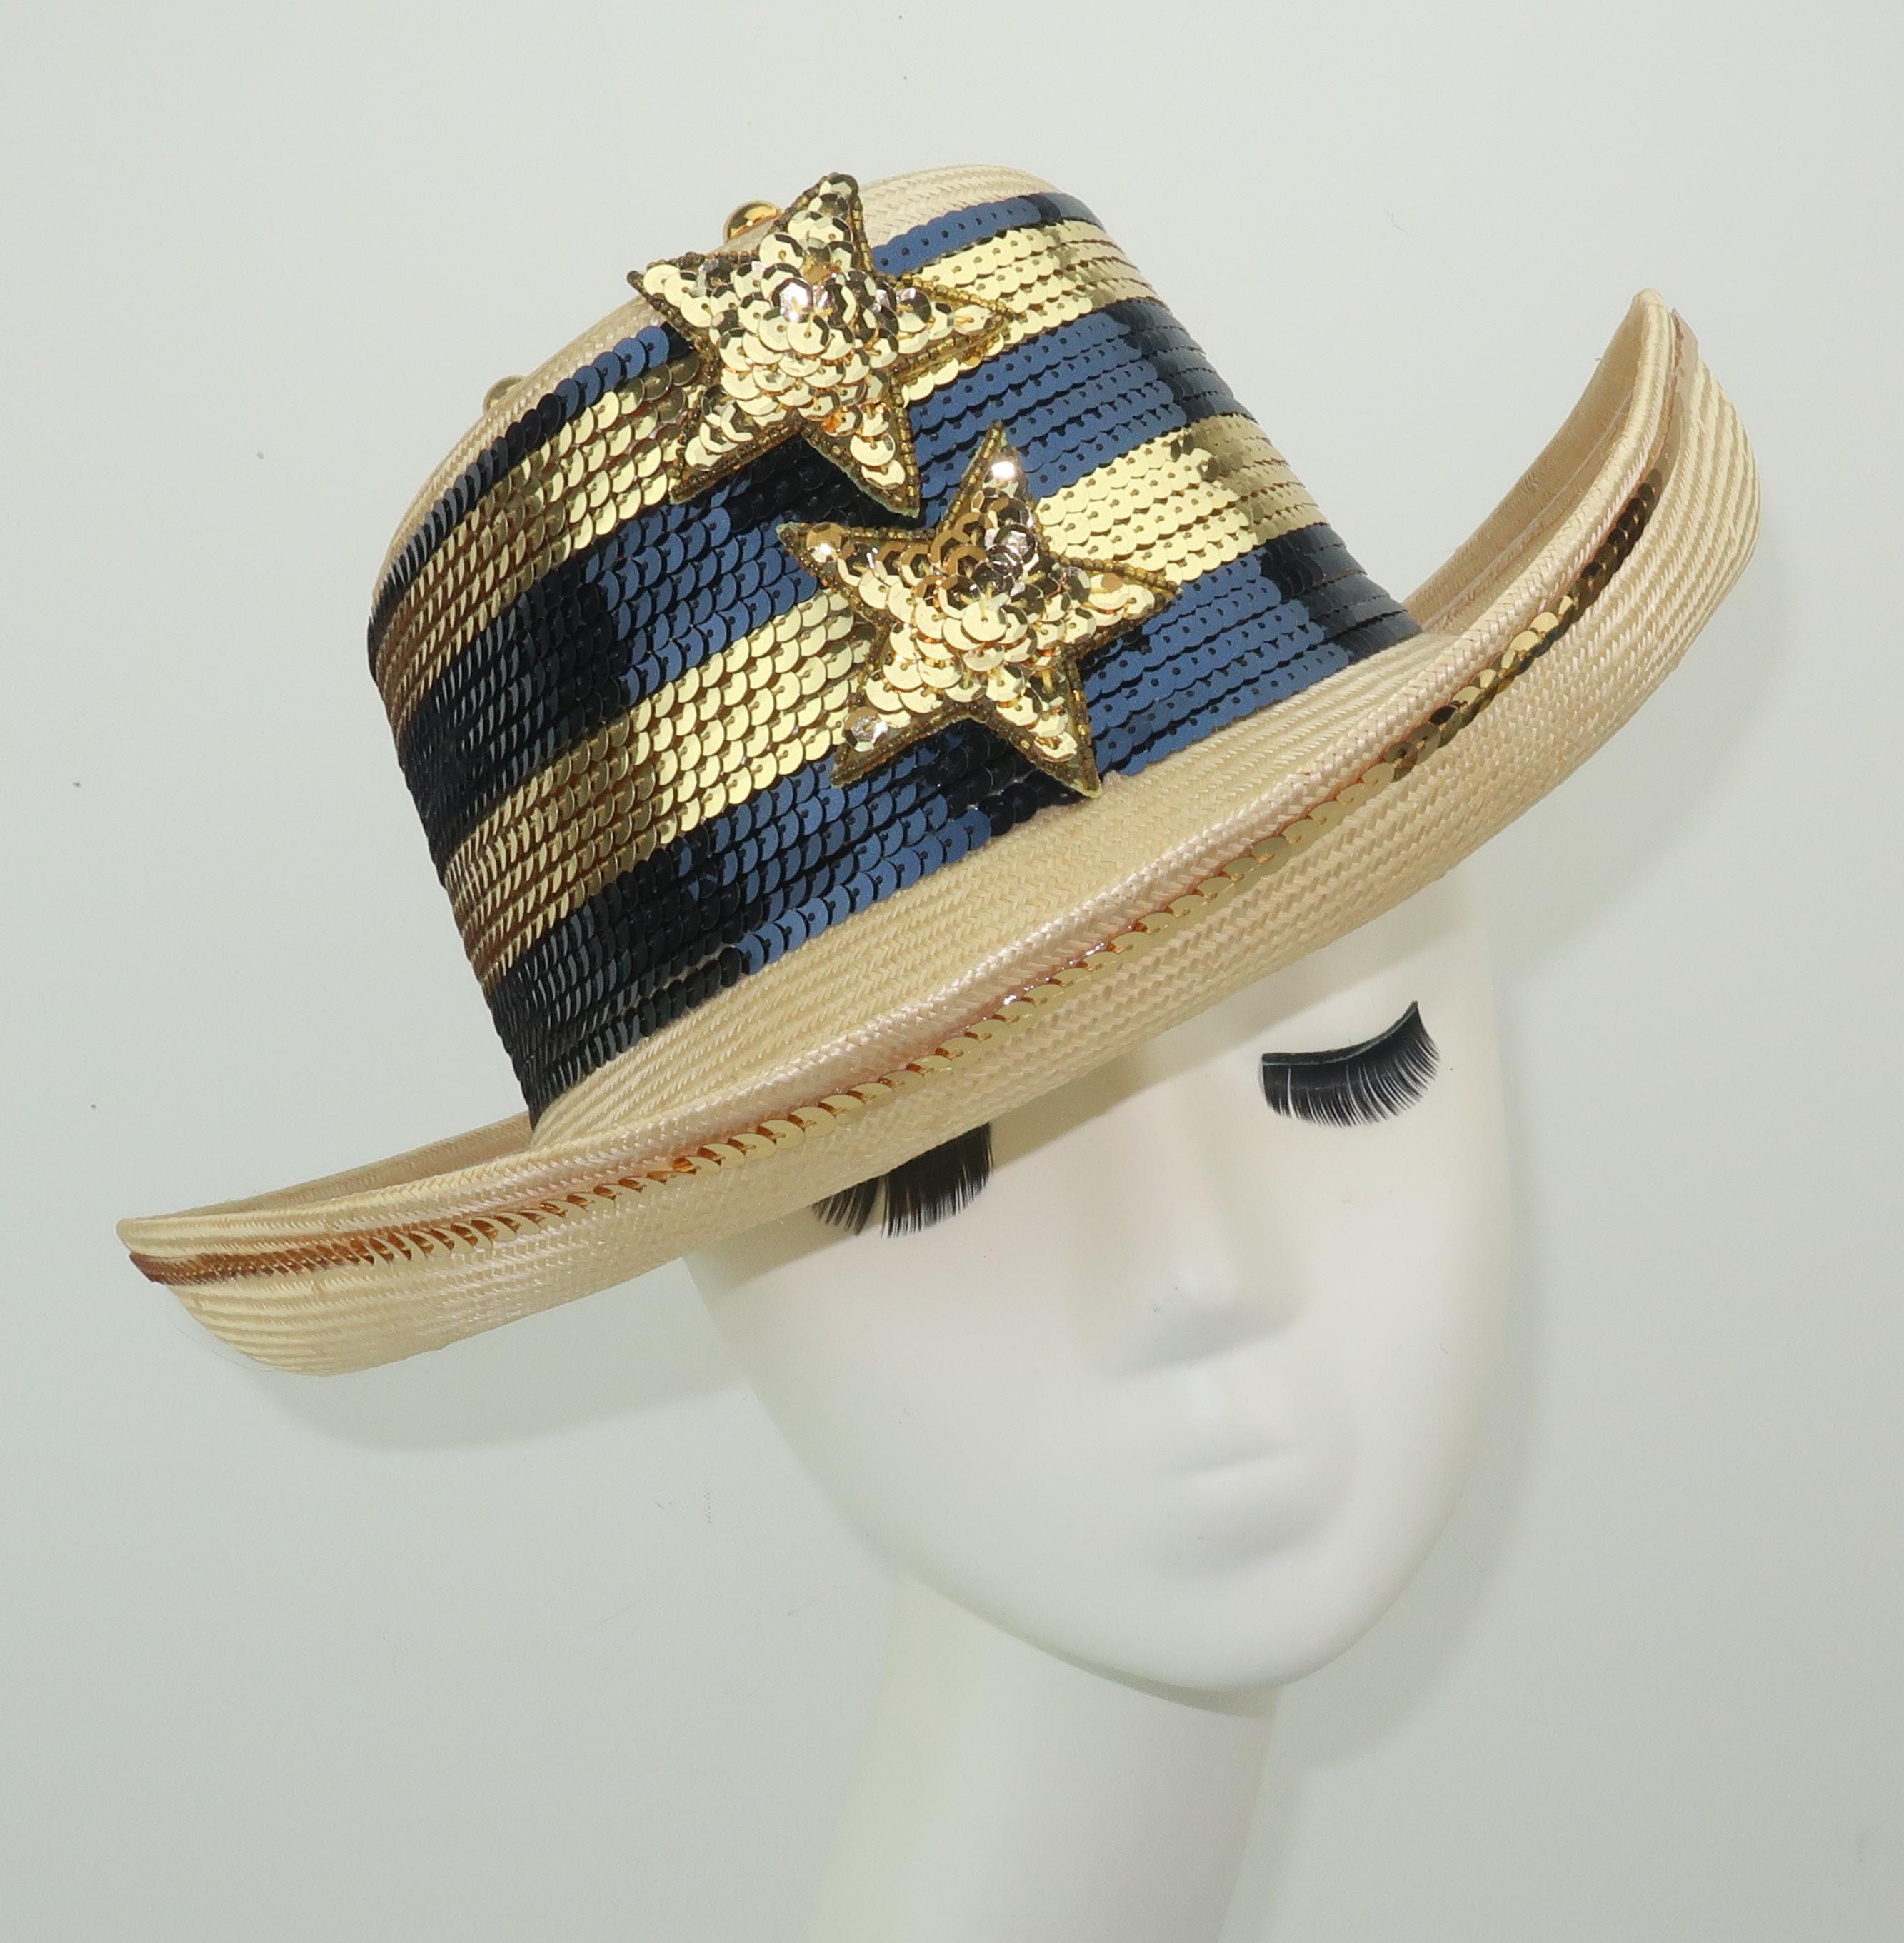 The stars and stripes get all glammed up in this Sonni of California hat designed by Michelle McGann, the 'hat lady' of professional golf.  Ms. McGann has become known not only for her talents on the greens but also for her whimsical style.  This